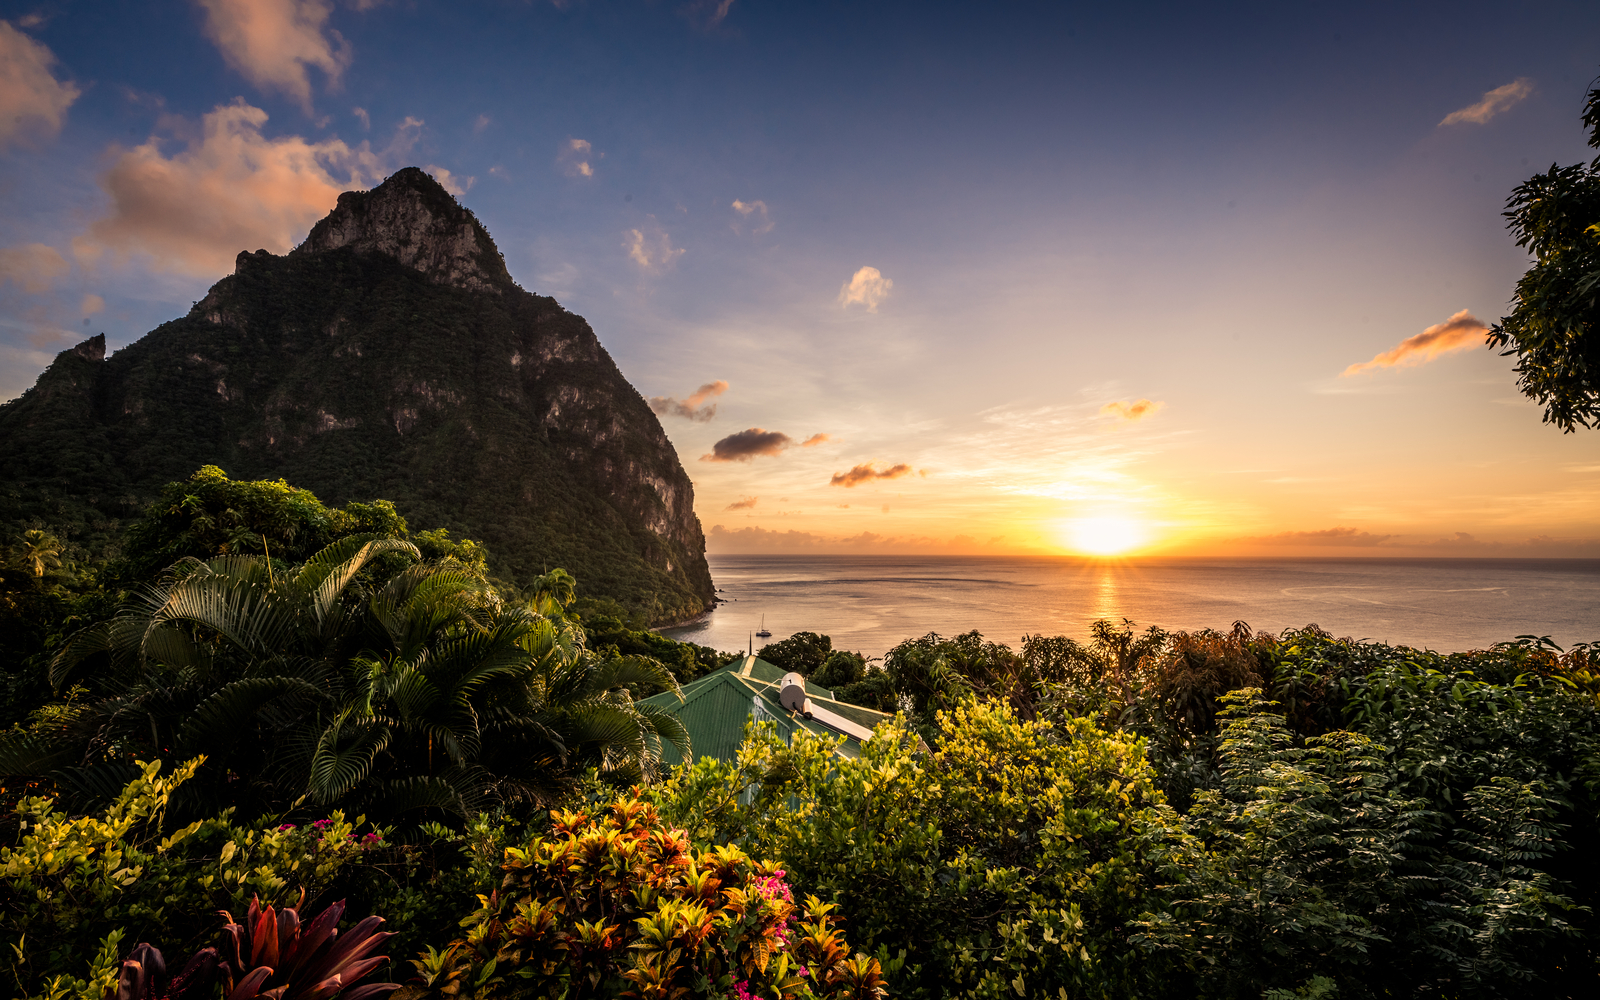 Sunset view from Jade Mountain, one of the best resorts in Saint Lucia